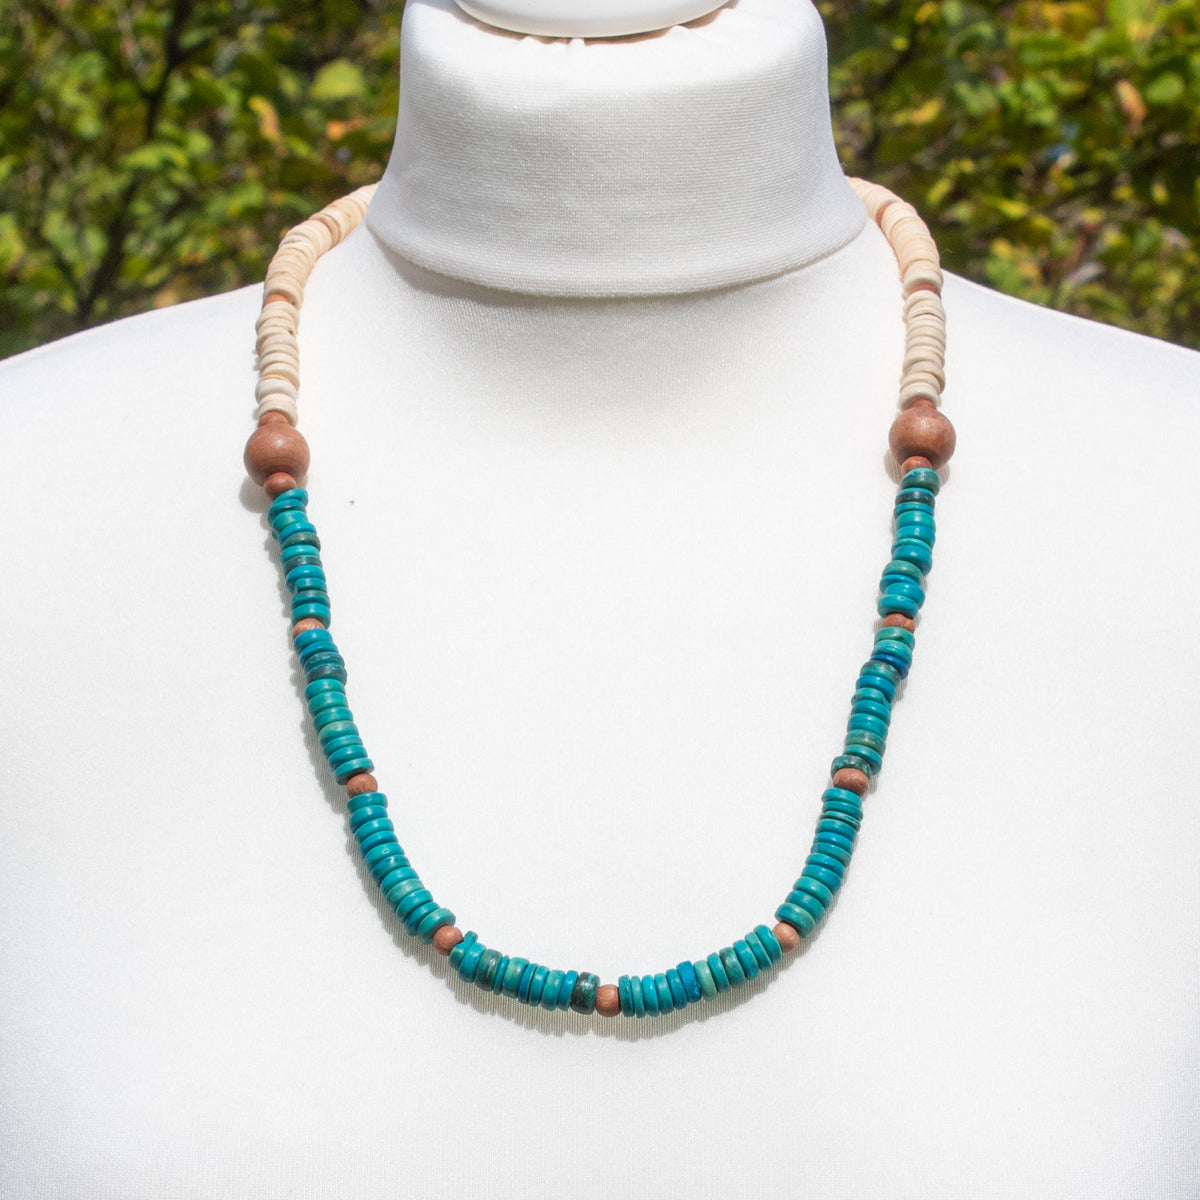 Cream &amp; Turquoise Wooden Bead Necklace | Necklace - The Naughty Shrew